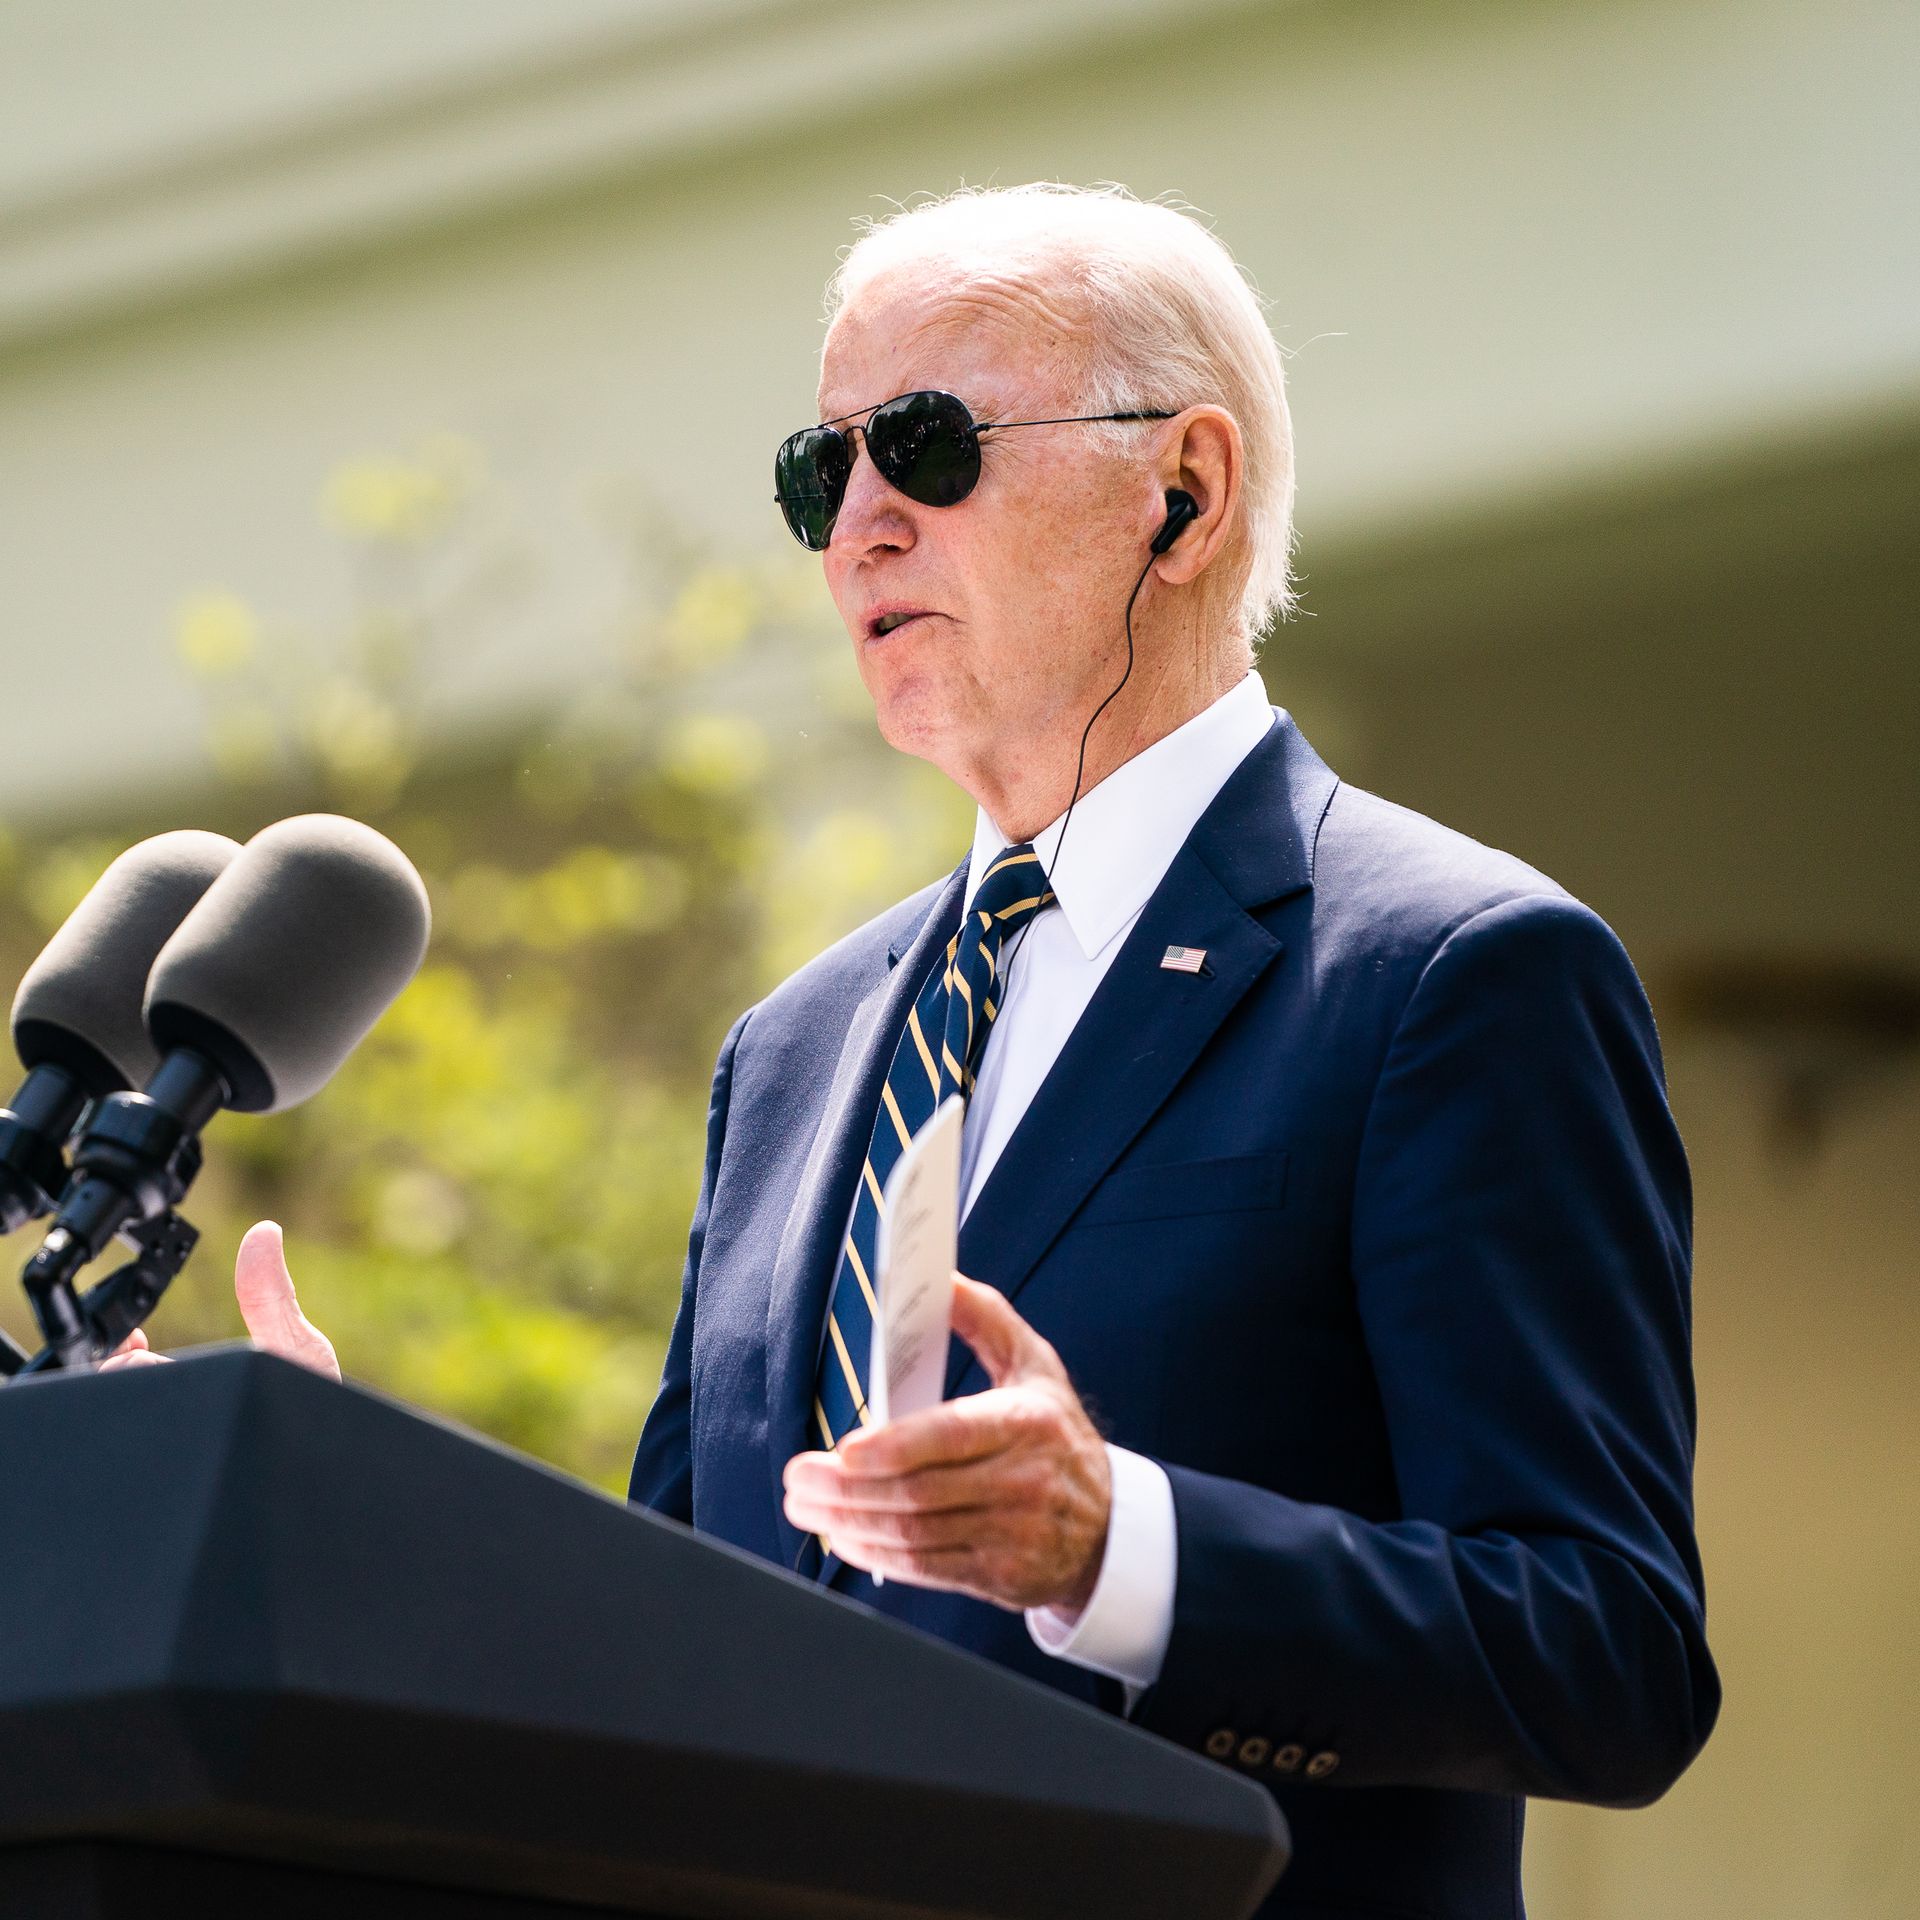 US President Joe Biden answers questions from the press during a joint press conference with President of the Republic of Korea Yoon Suk Yeol in the Rose Garden of the White House on Wednesday, April 26, 2023. (